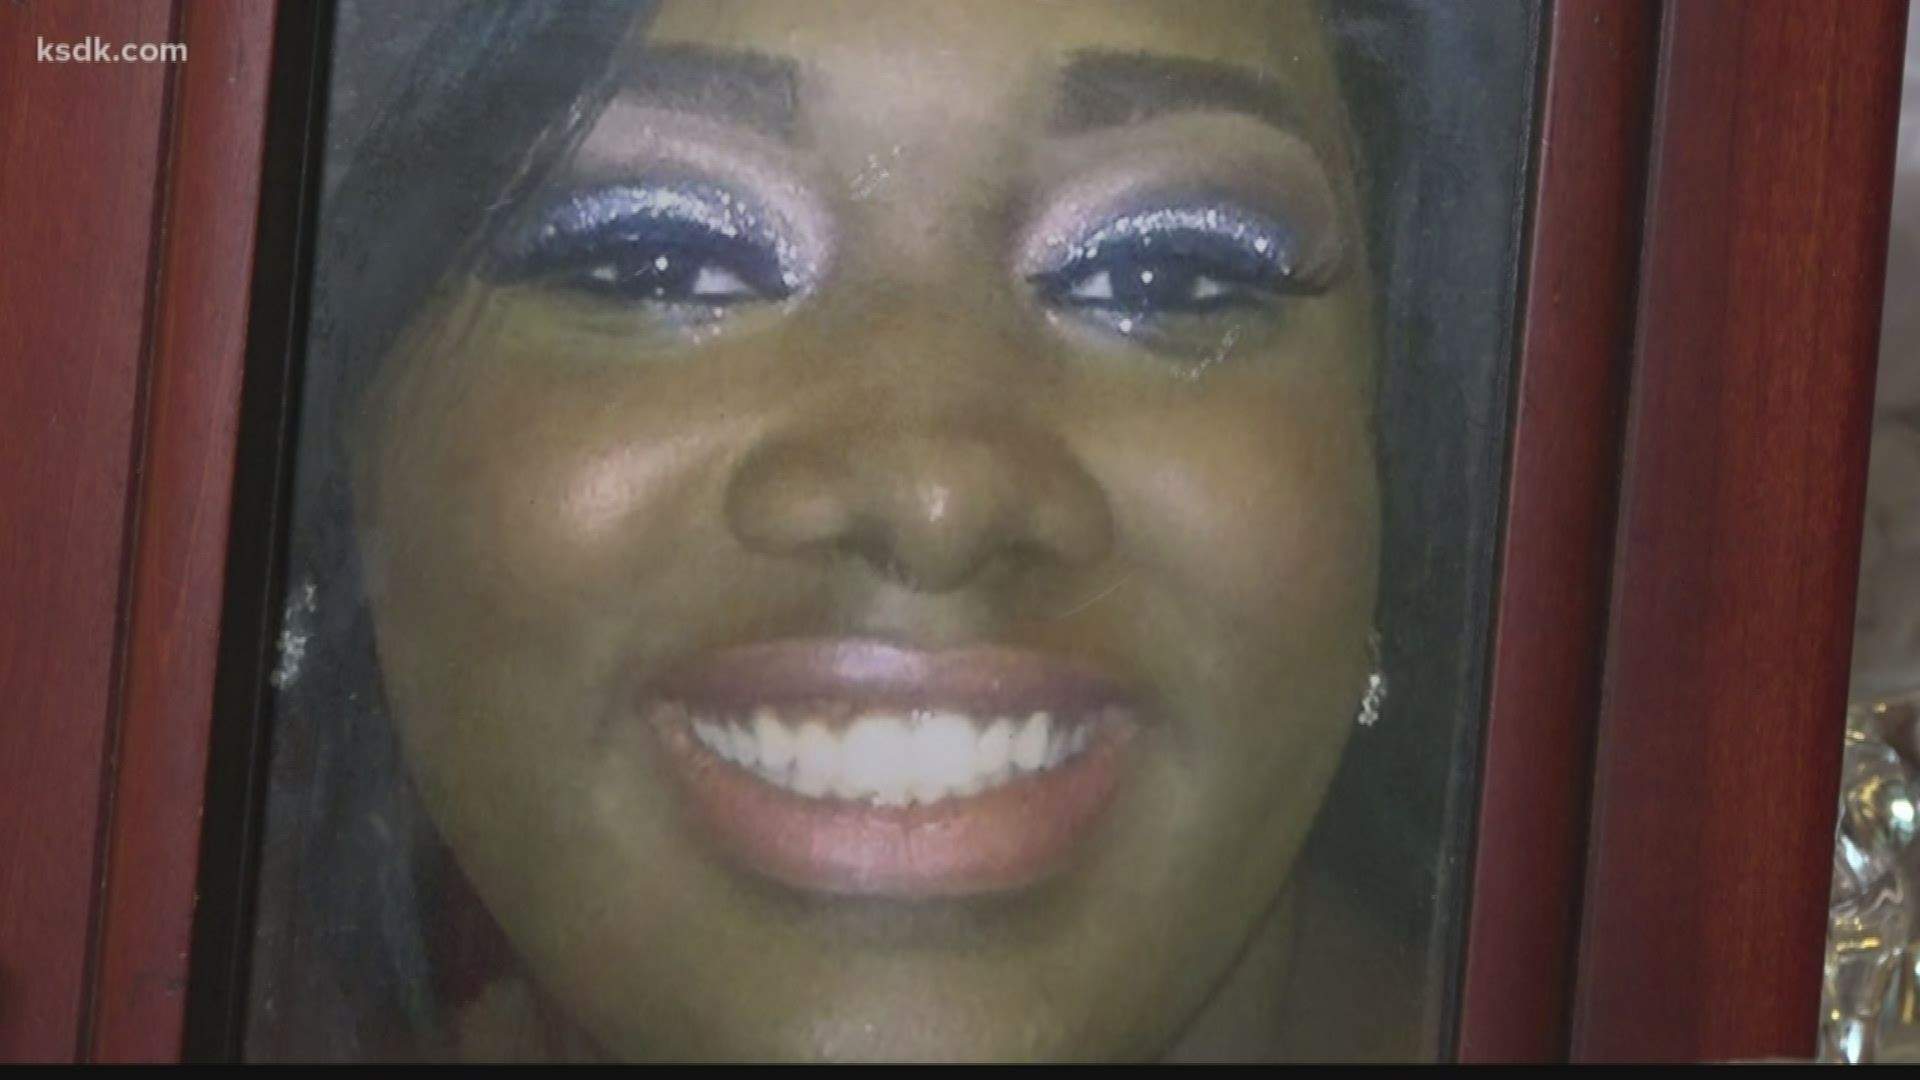 Police say someone shot and killed Tyra Harris outside an apartment complex Sunday night.